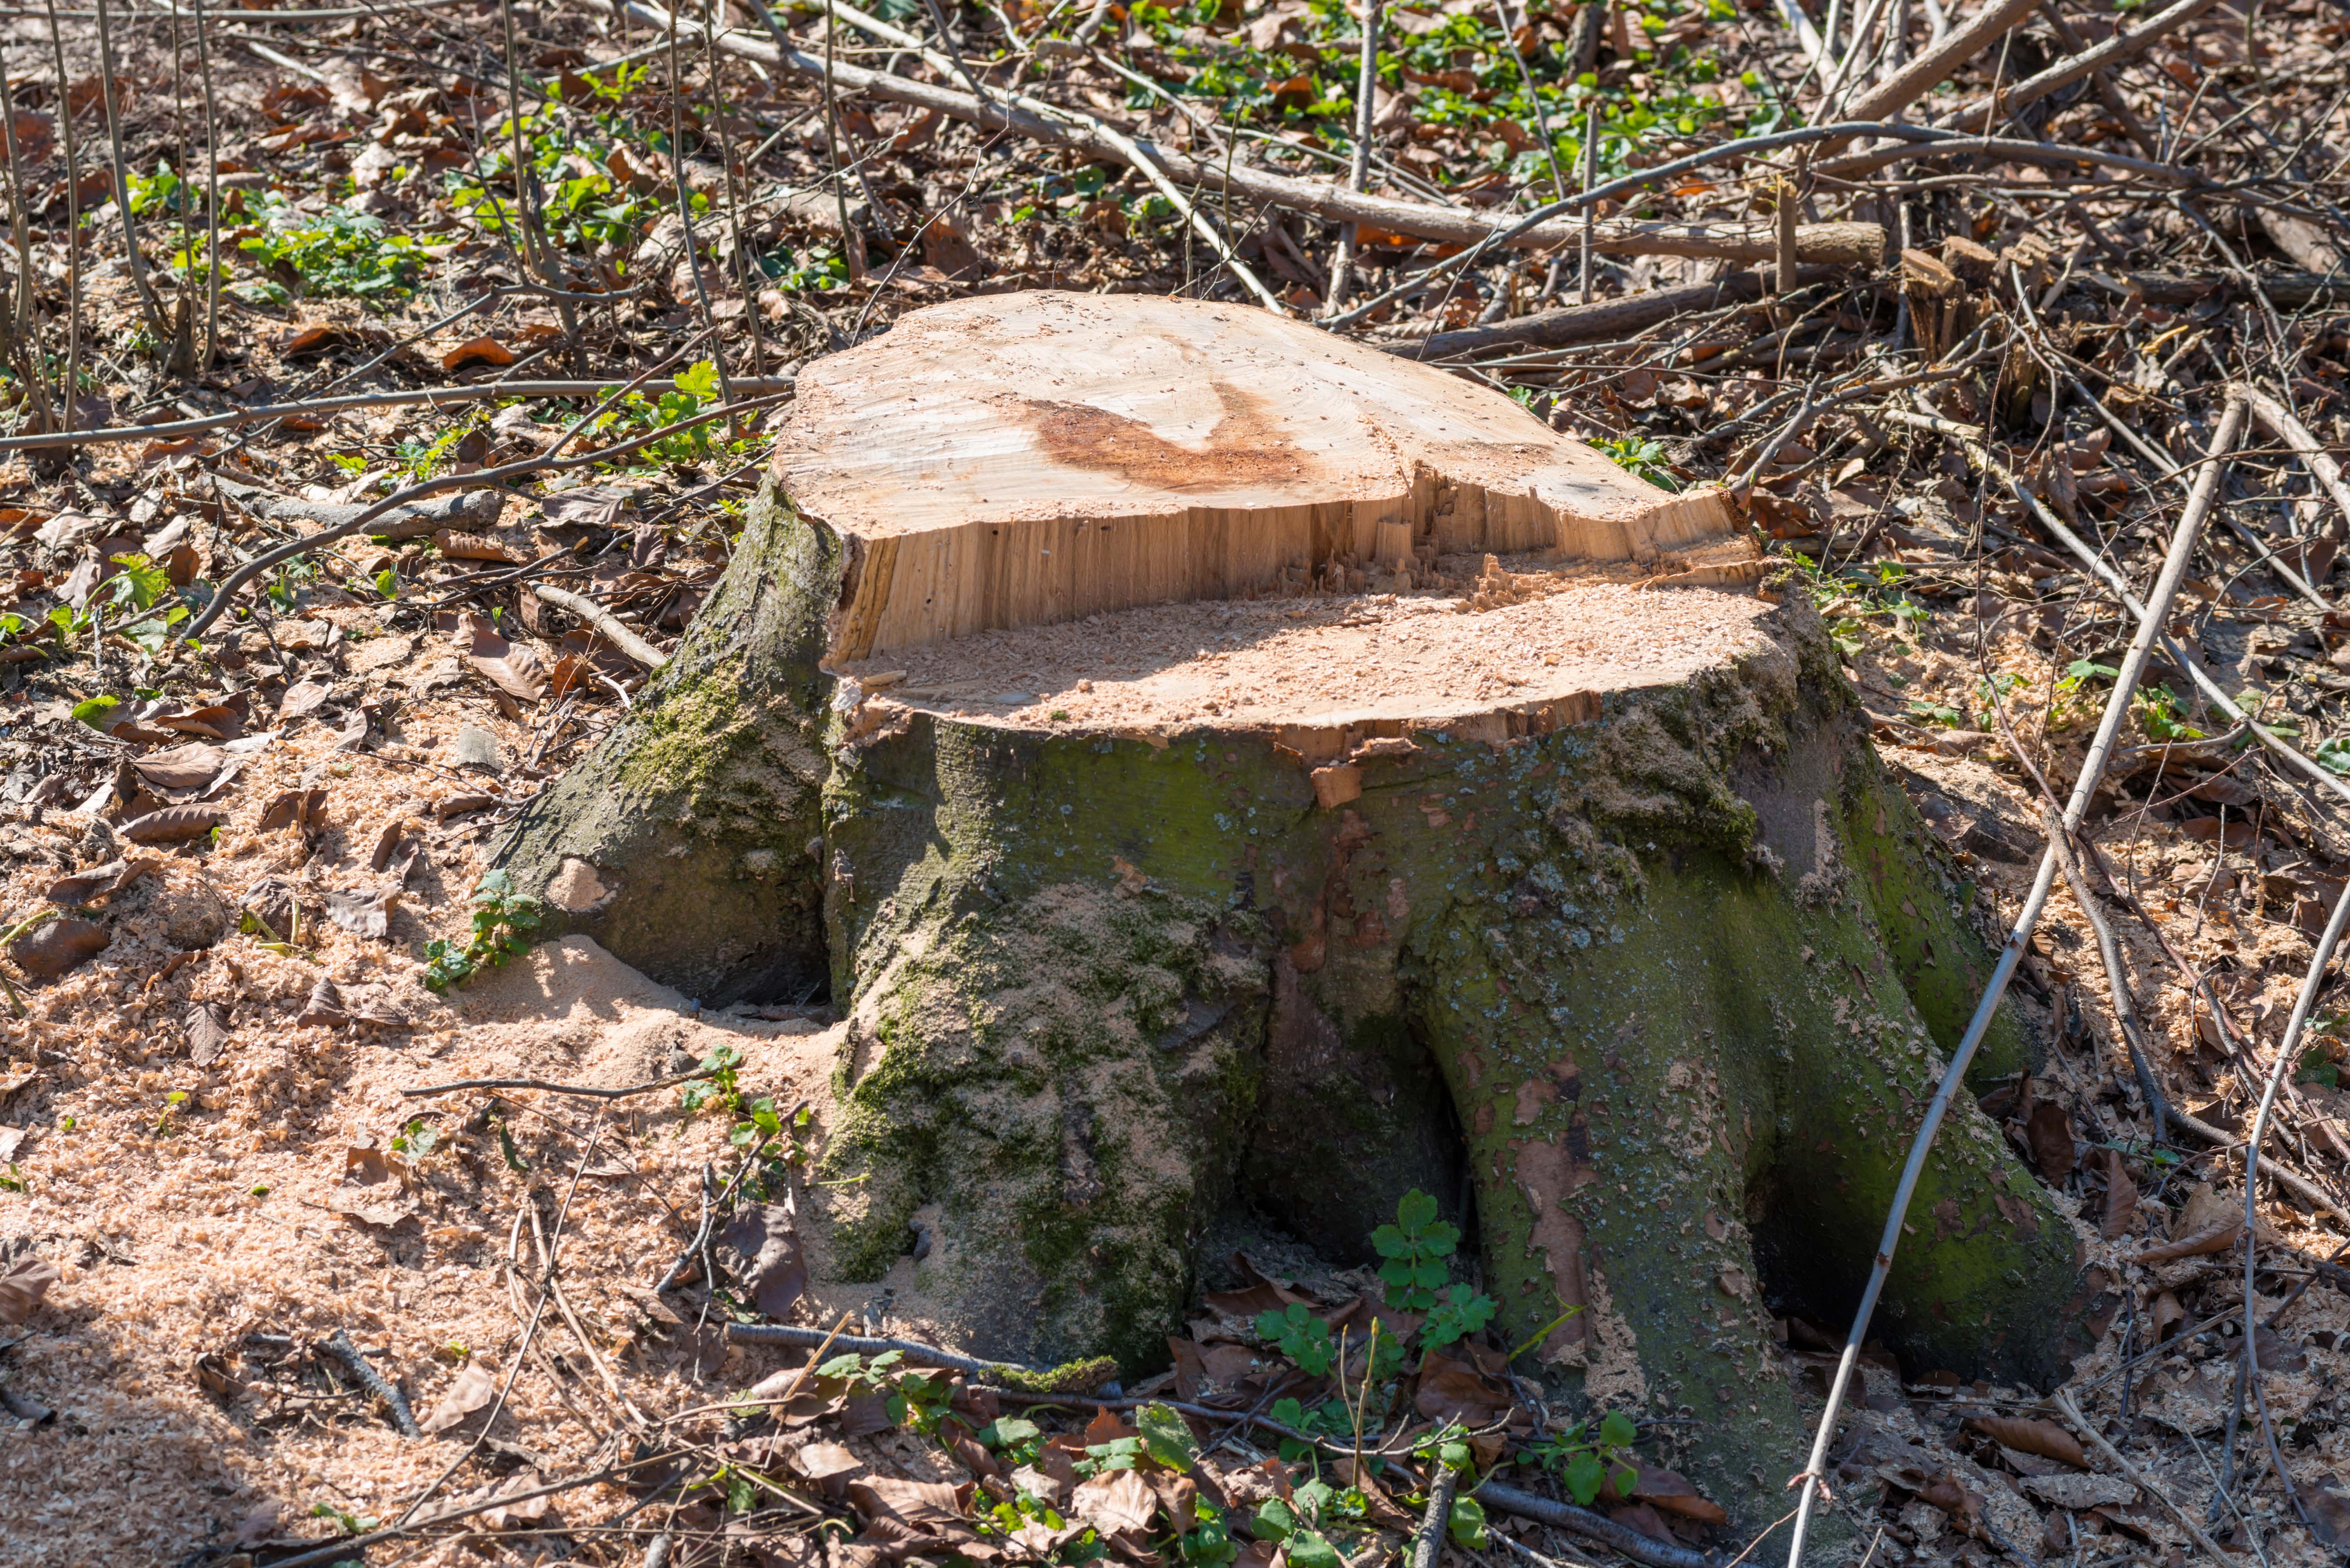 an image of a tree stump